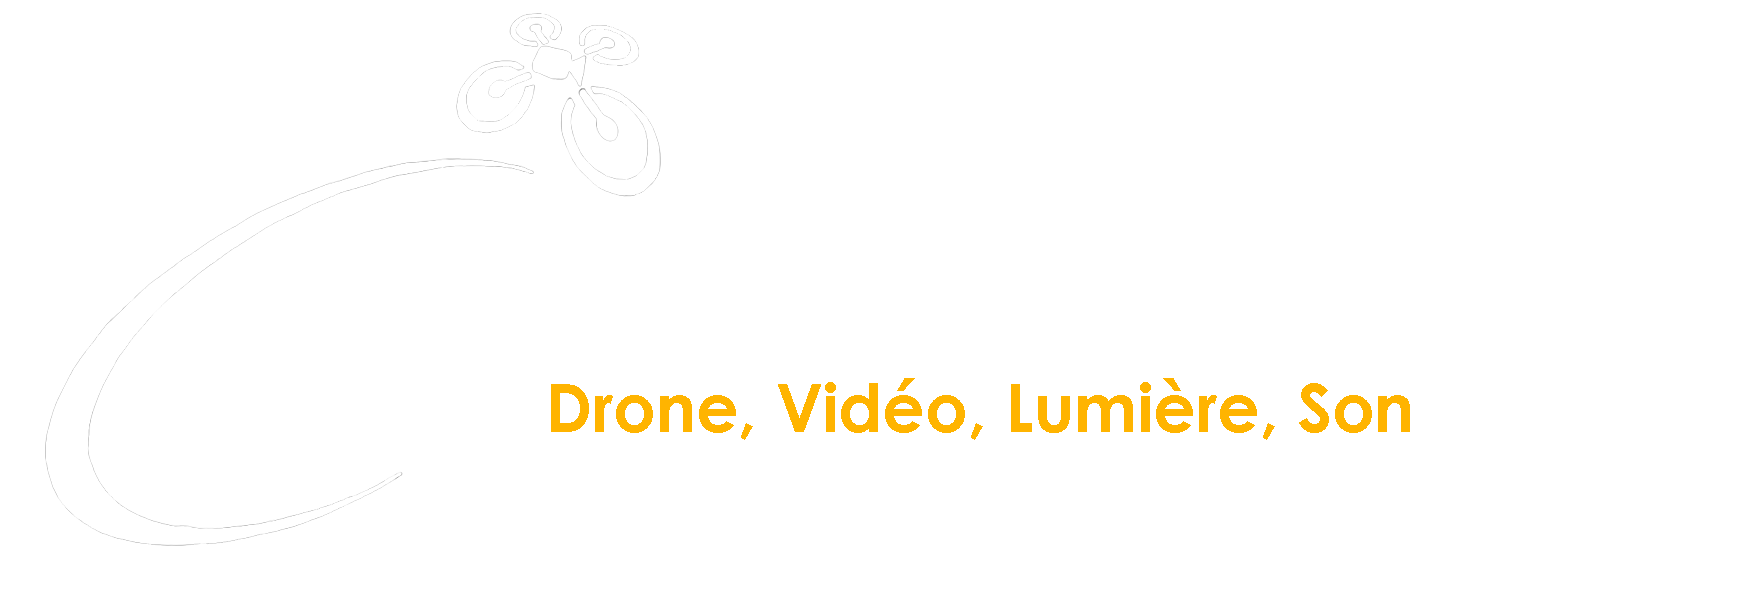 www.streaming-live.me